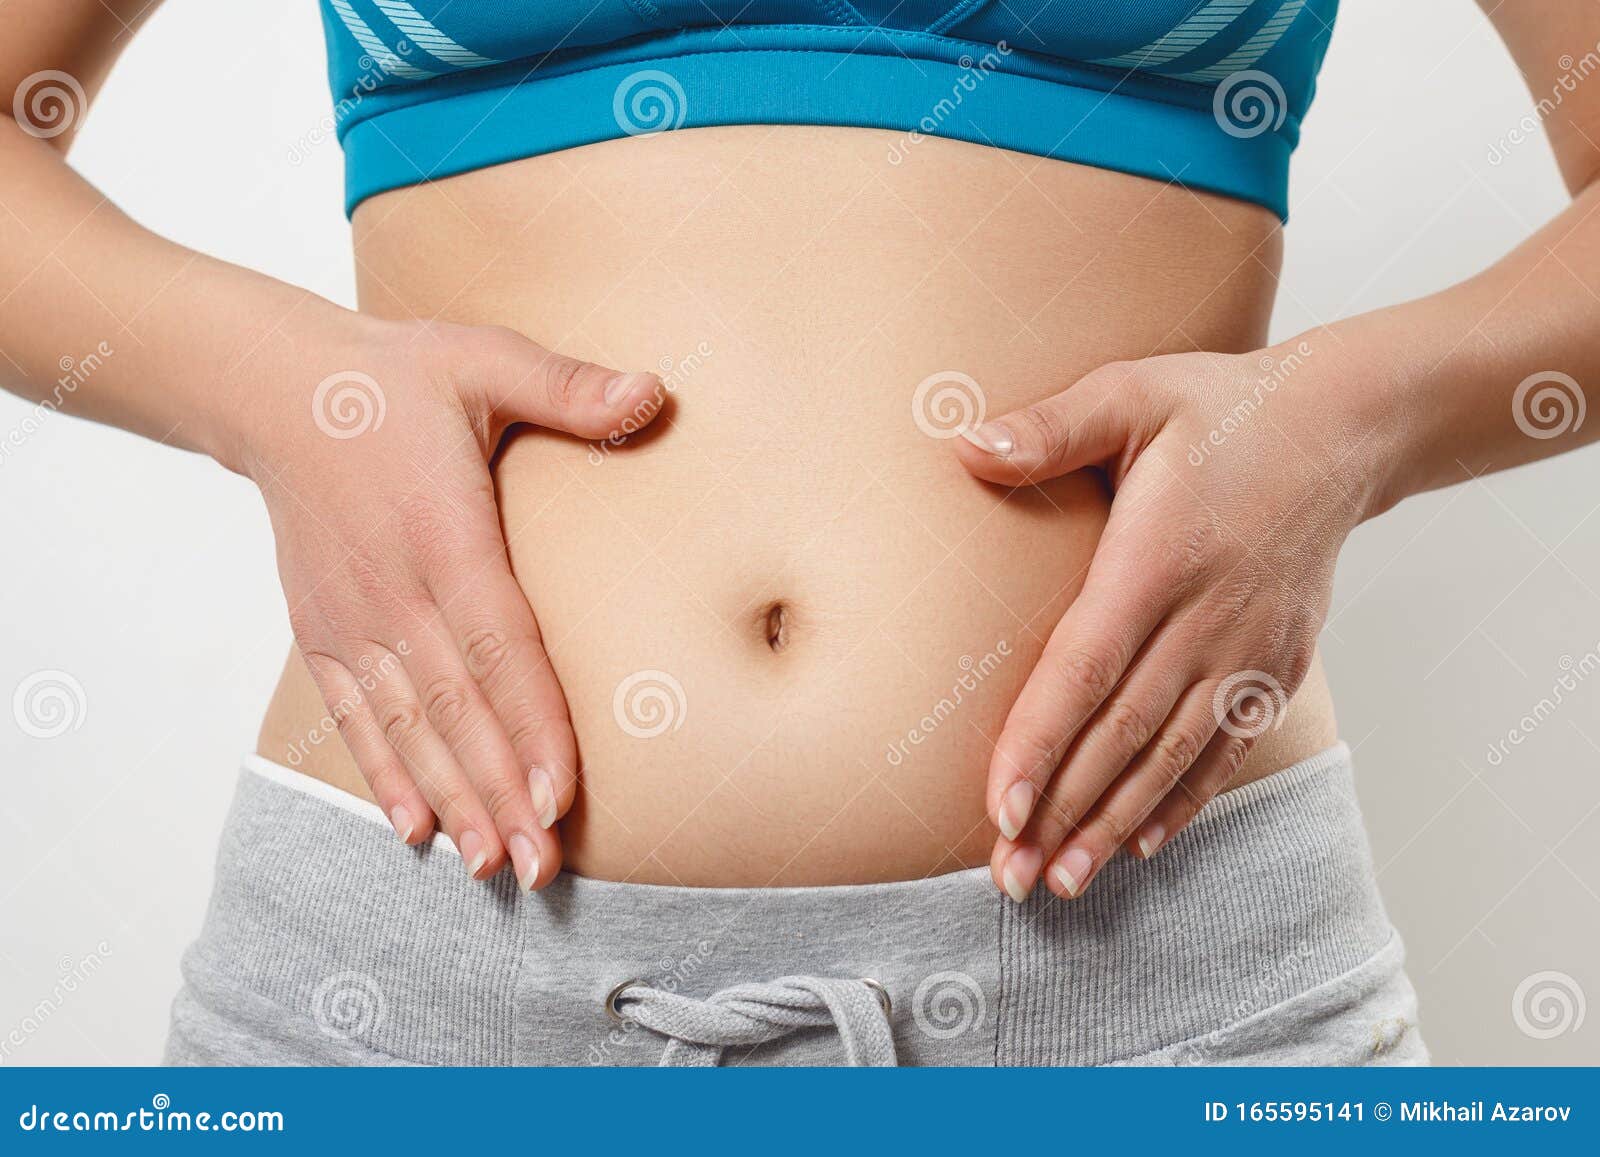 Belly Of A Young Woman In The Early Stages Of Pregnancy ...